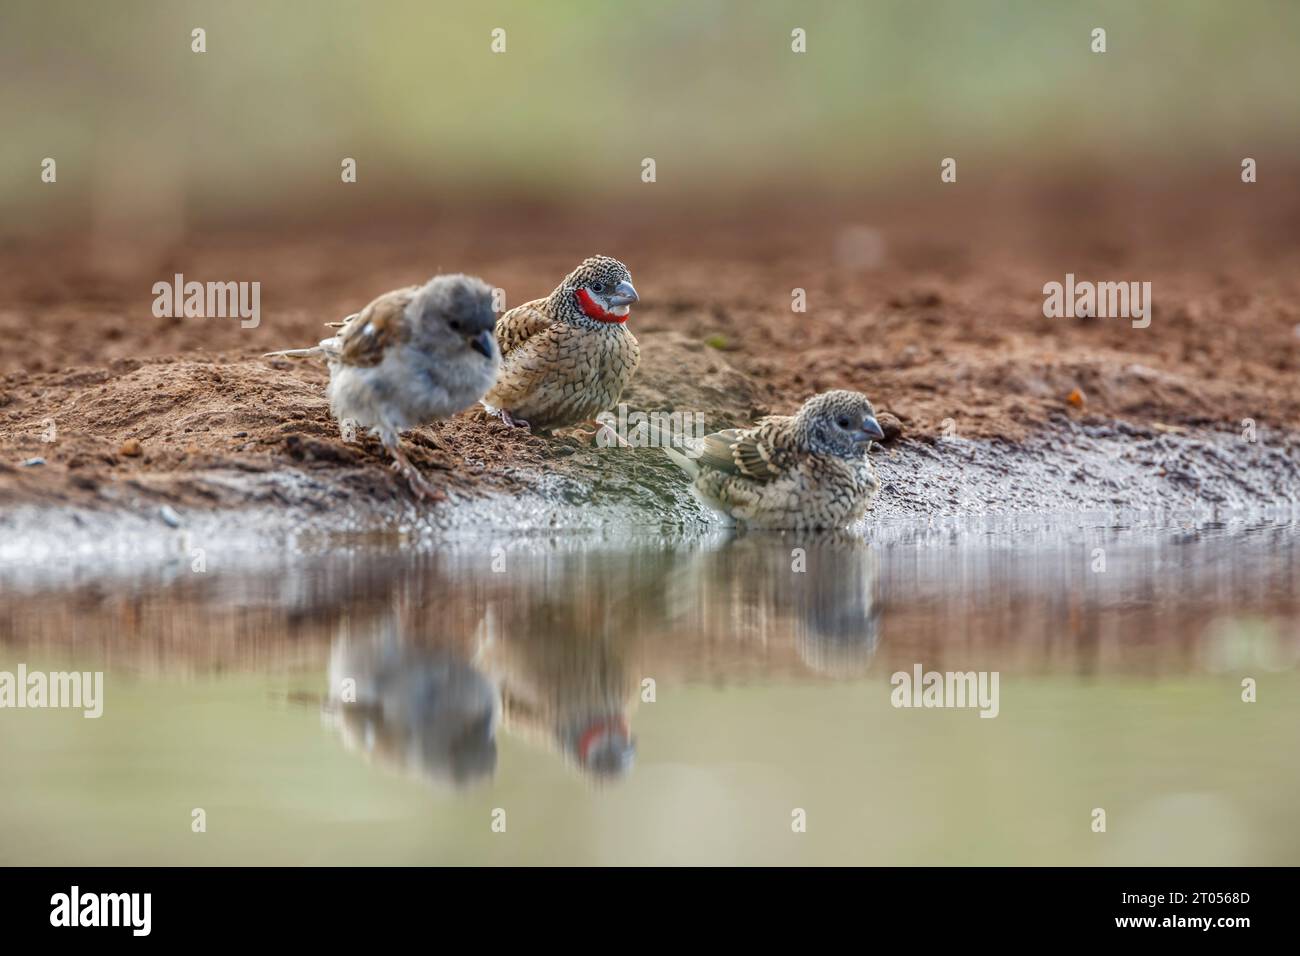 Cut throat finch couple bathing in waterhole in Kruger National park, South Africa ; Specie Amadina fasciata family of Estrildidae Stock Photo